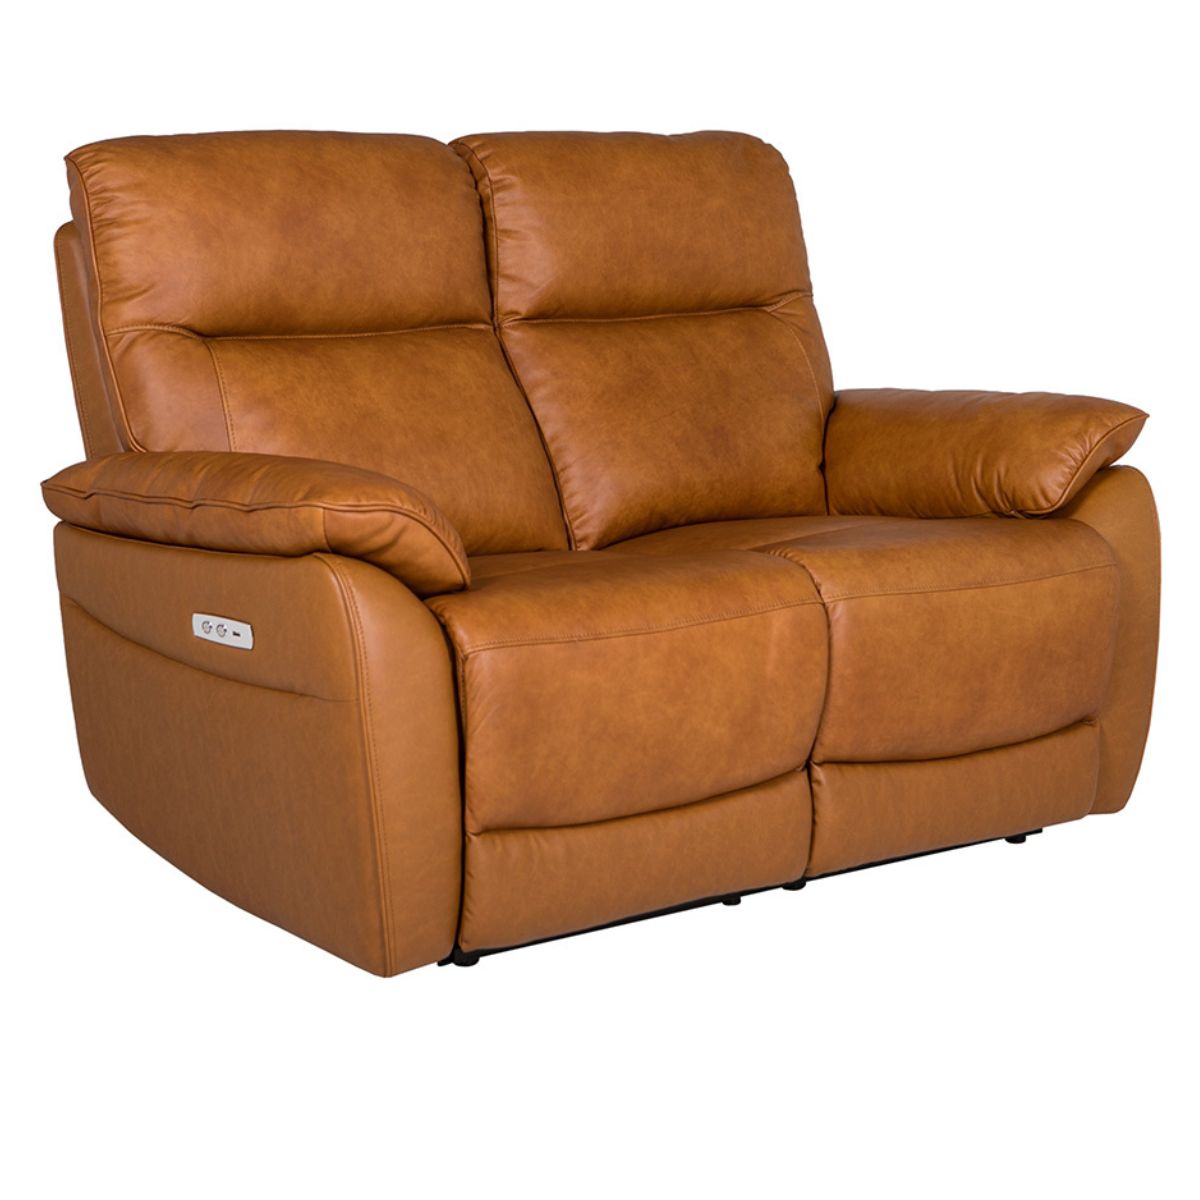 Newport Tan Leather 2 Seater Electric Recliner - 1